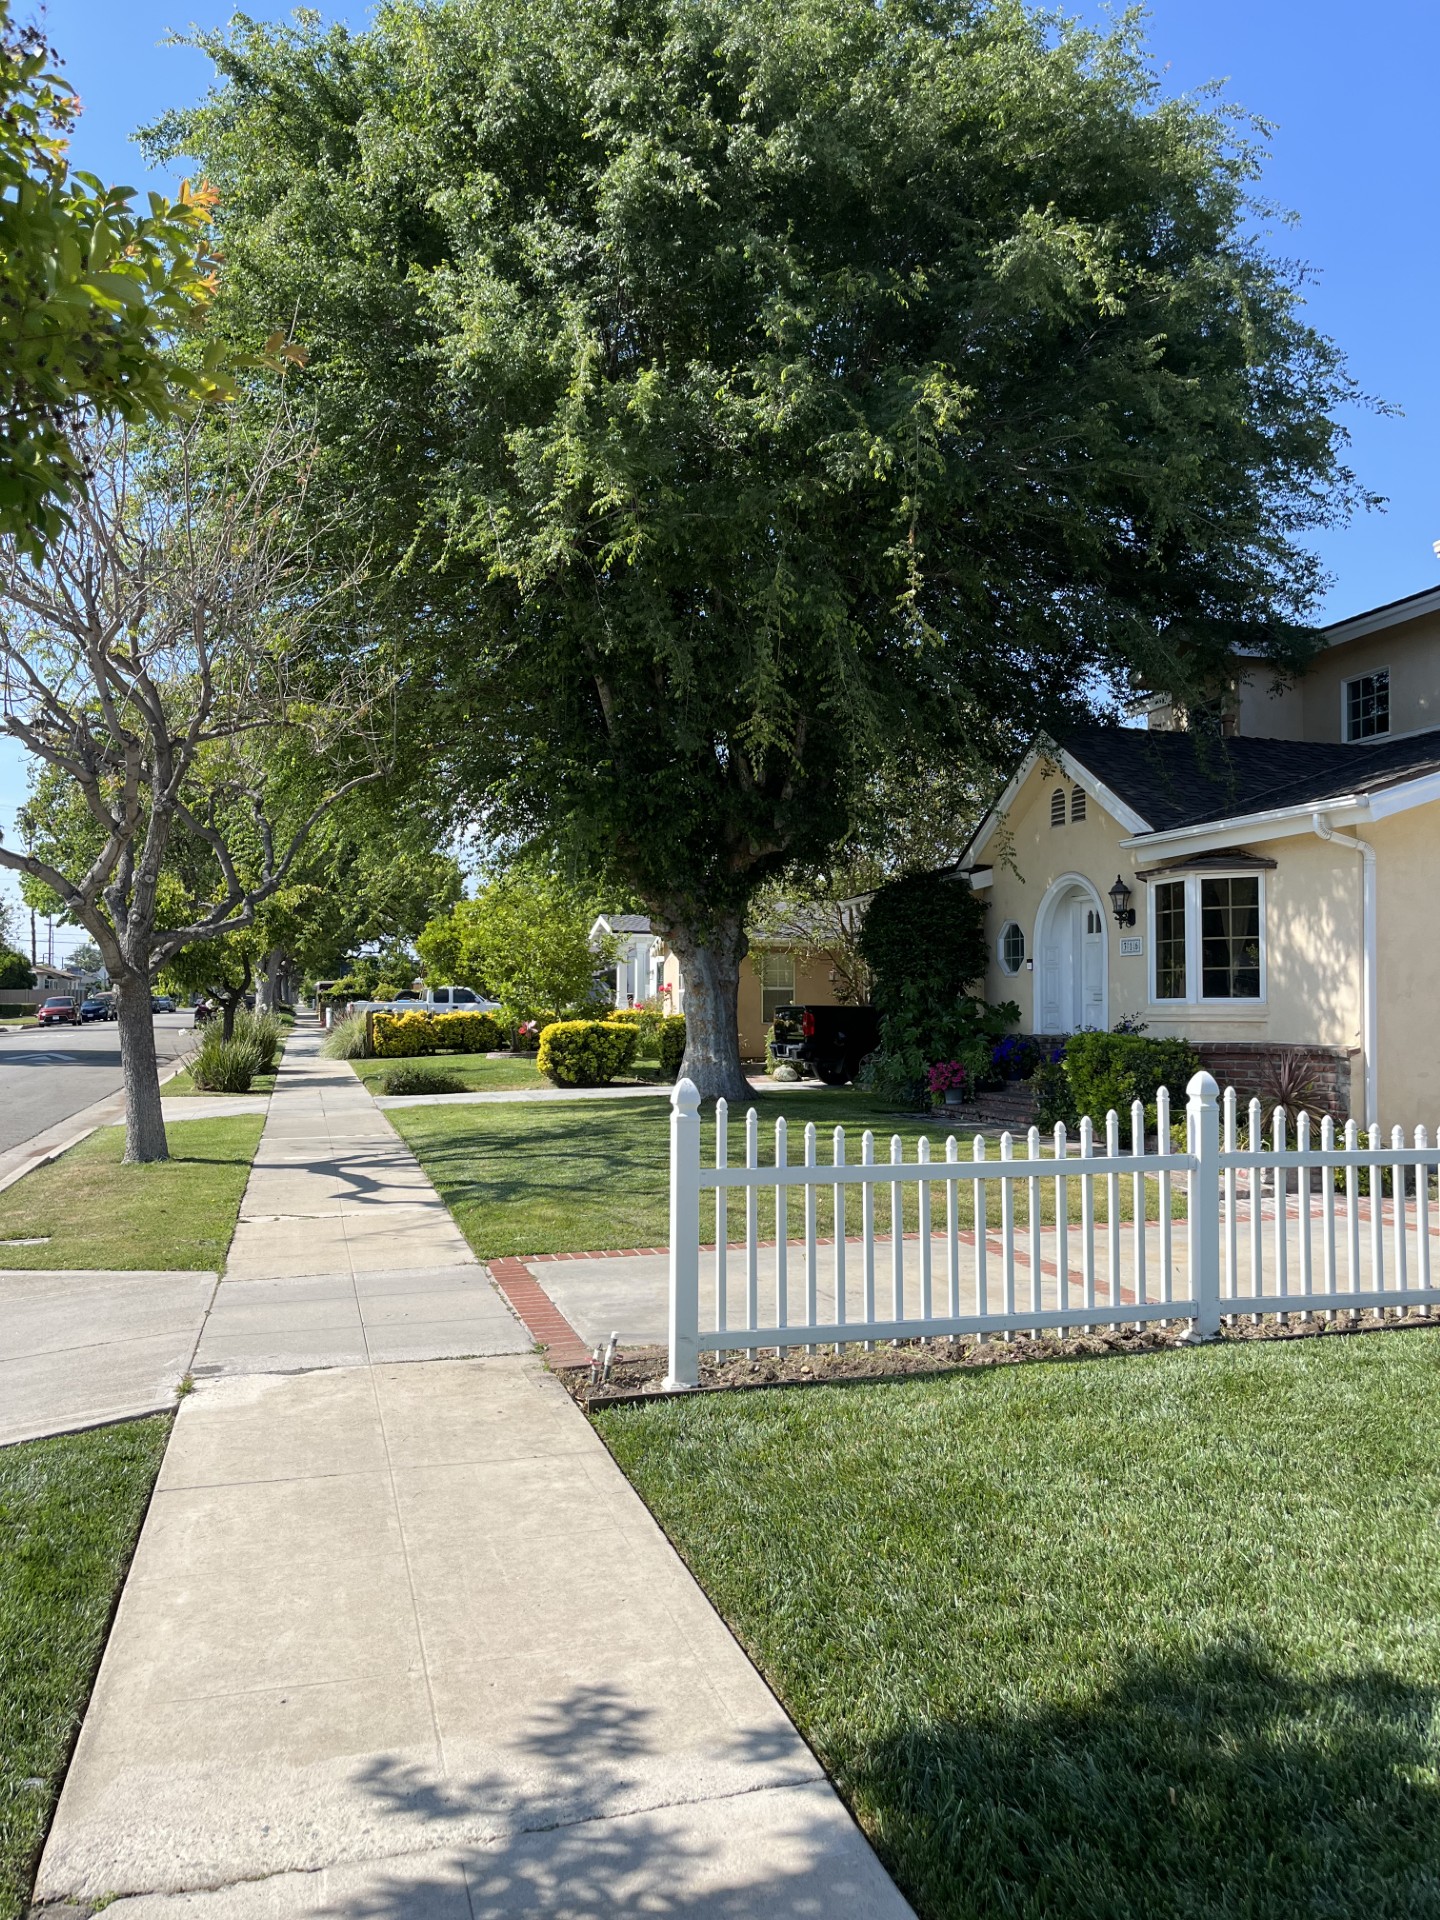 A white fence in front of a house